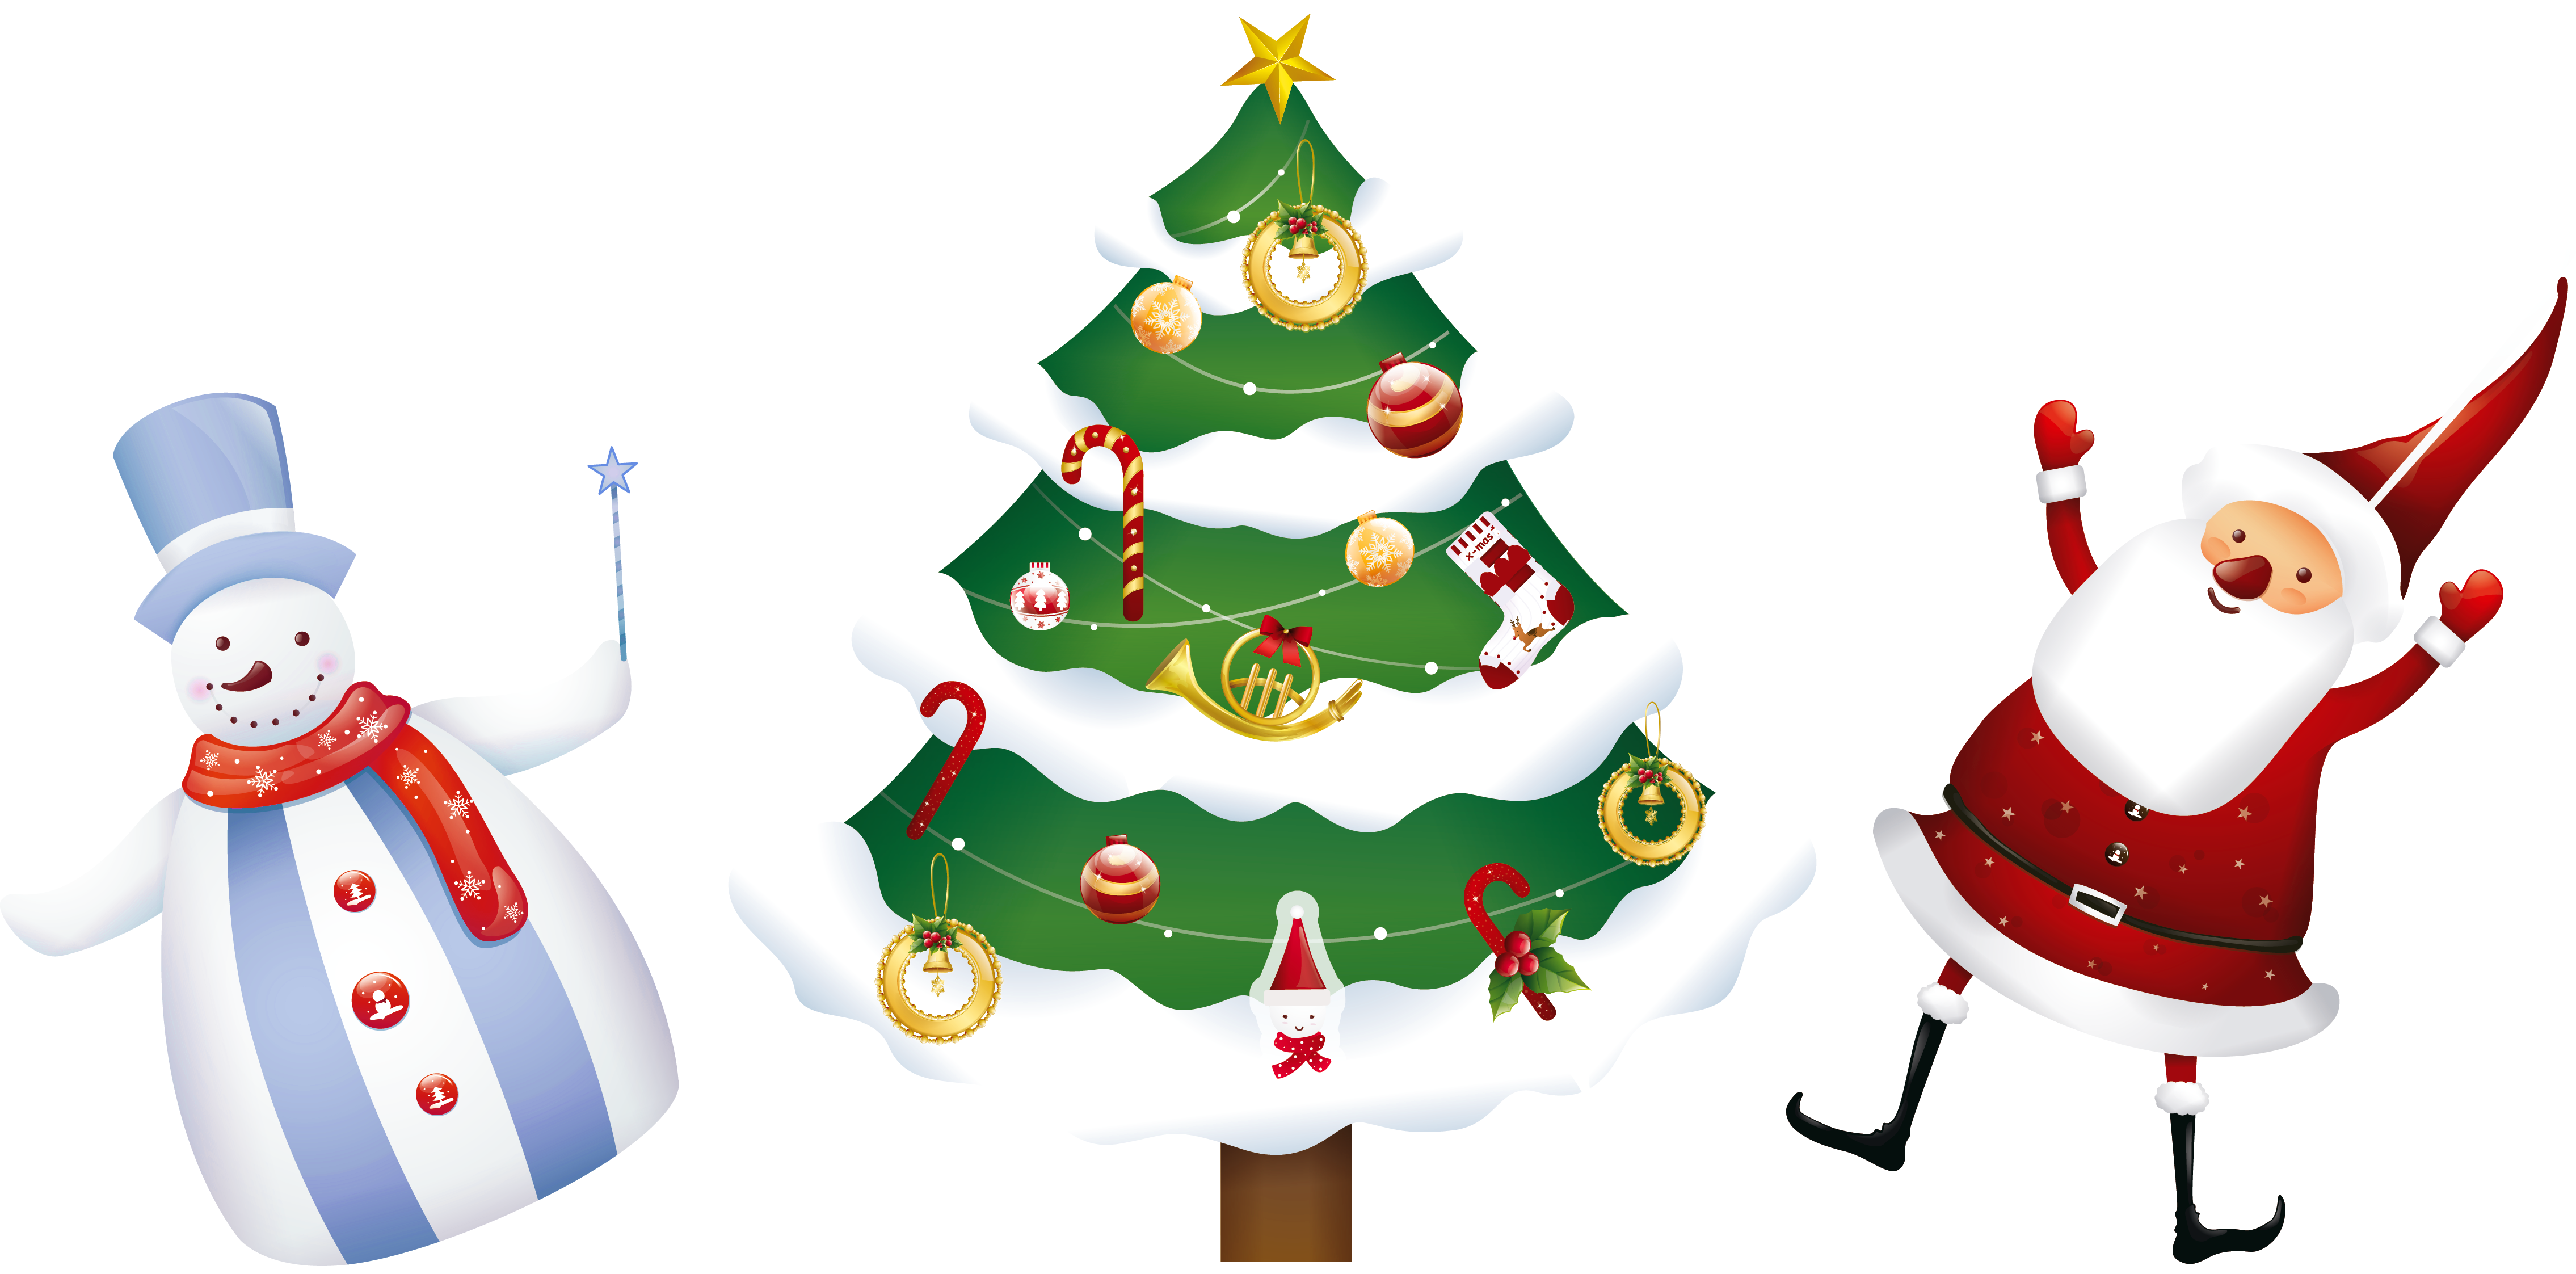 Transparent Christmas Santa Tree and Snowman PNG Clipart